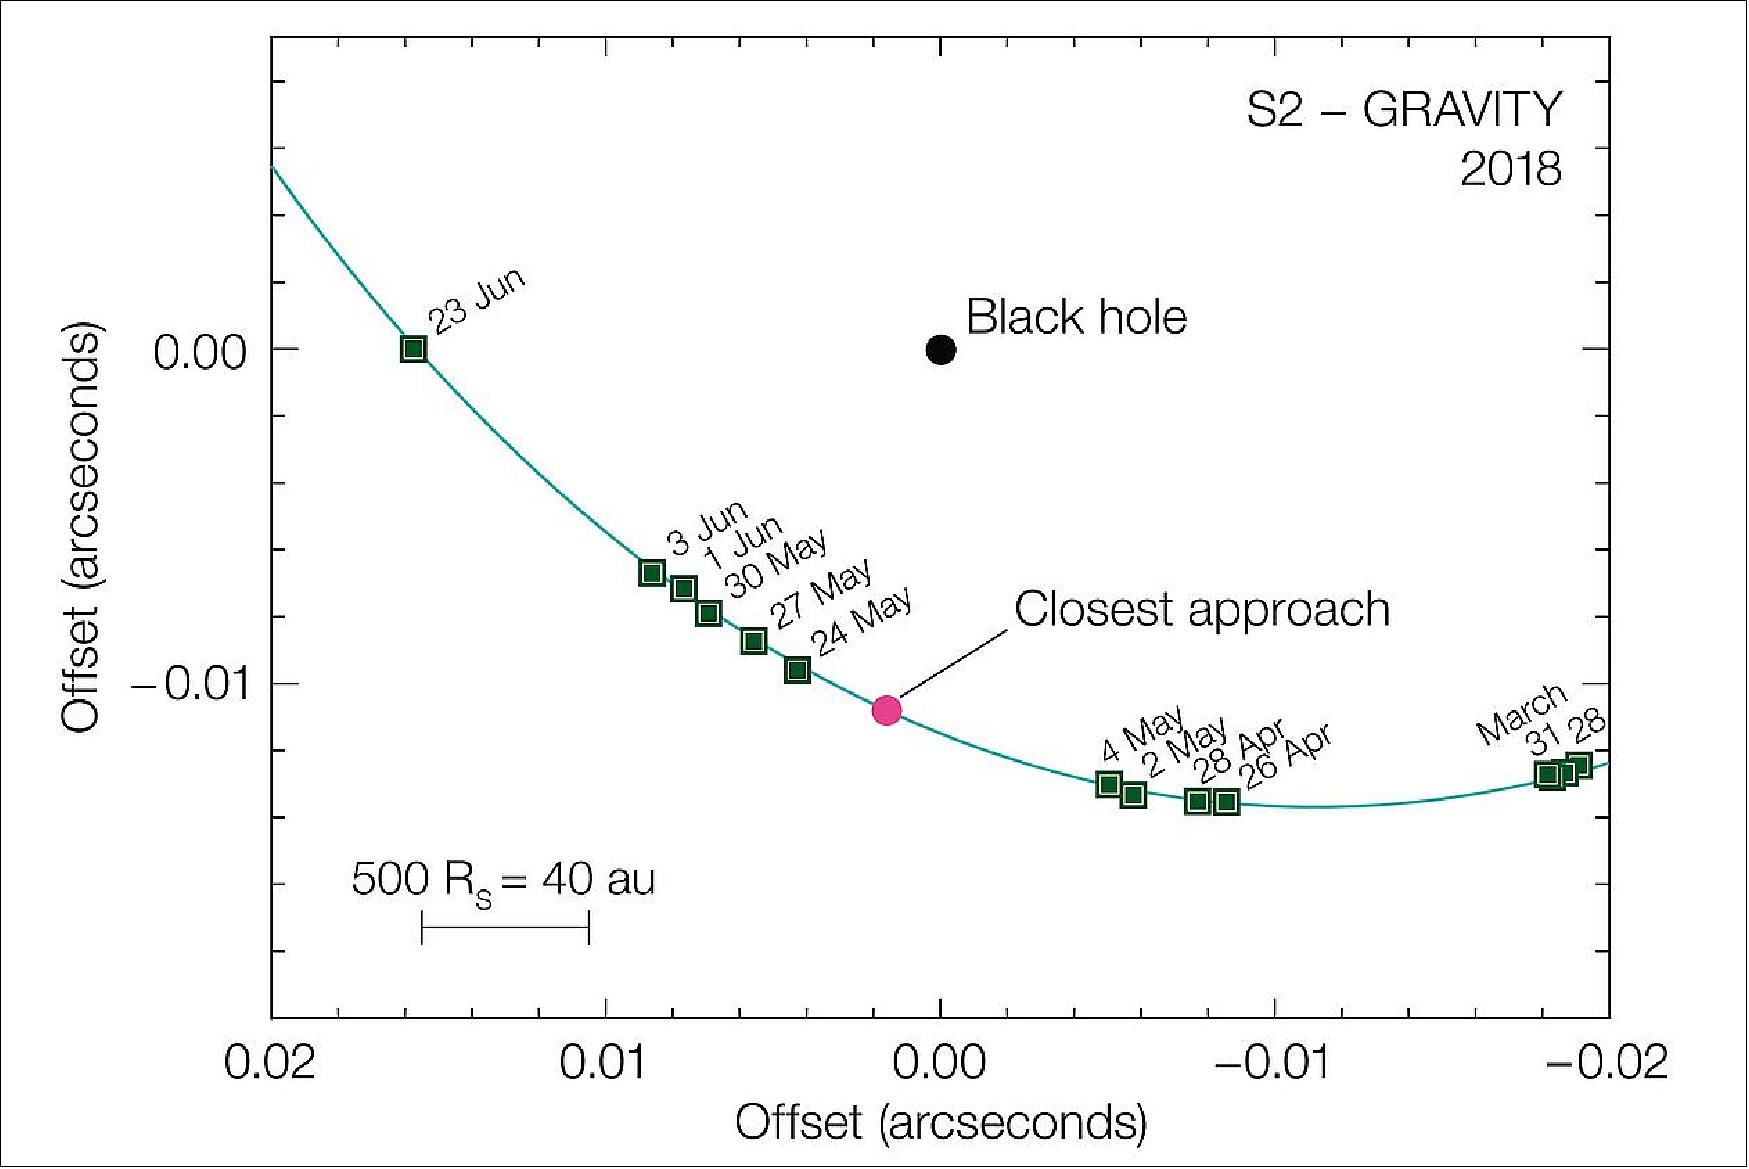 Figure 67: This diagram shows the motion of the star S2 as it passes close to the supermassive black hole at the center of the Milky Way. It was compiled from observations with the GRAVITY instrument in the VLT interferometer. At this point the star was travelling at nearly 3% of the speed of light and its shift in position can be seen from night to night. The sizes of the star and the black hole are not to scale (image credit: ESO/MPE/GRAVITY Collaboration) 101)